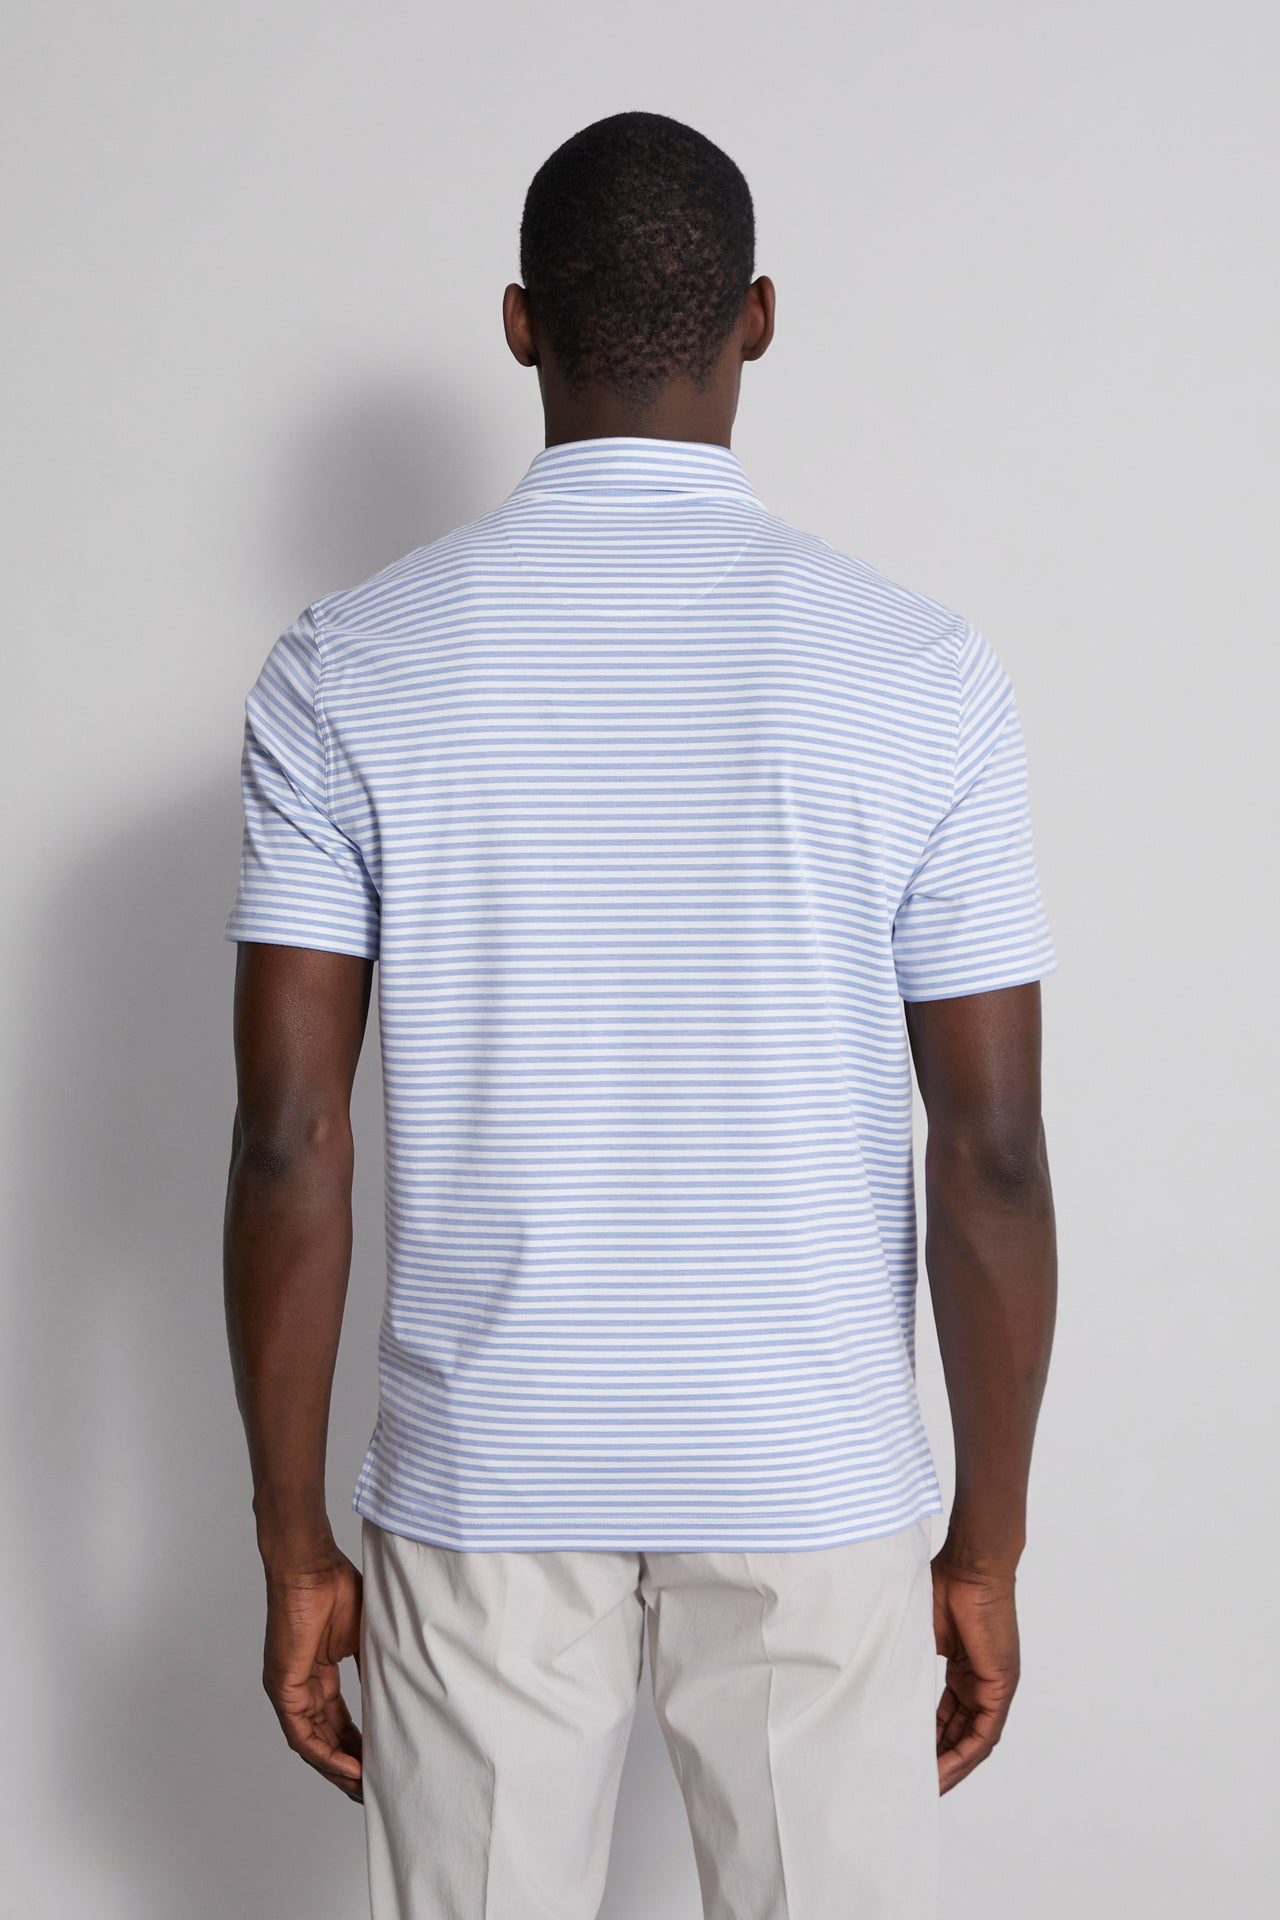 men's striped polo t-shirt blue and white - back view